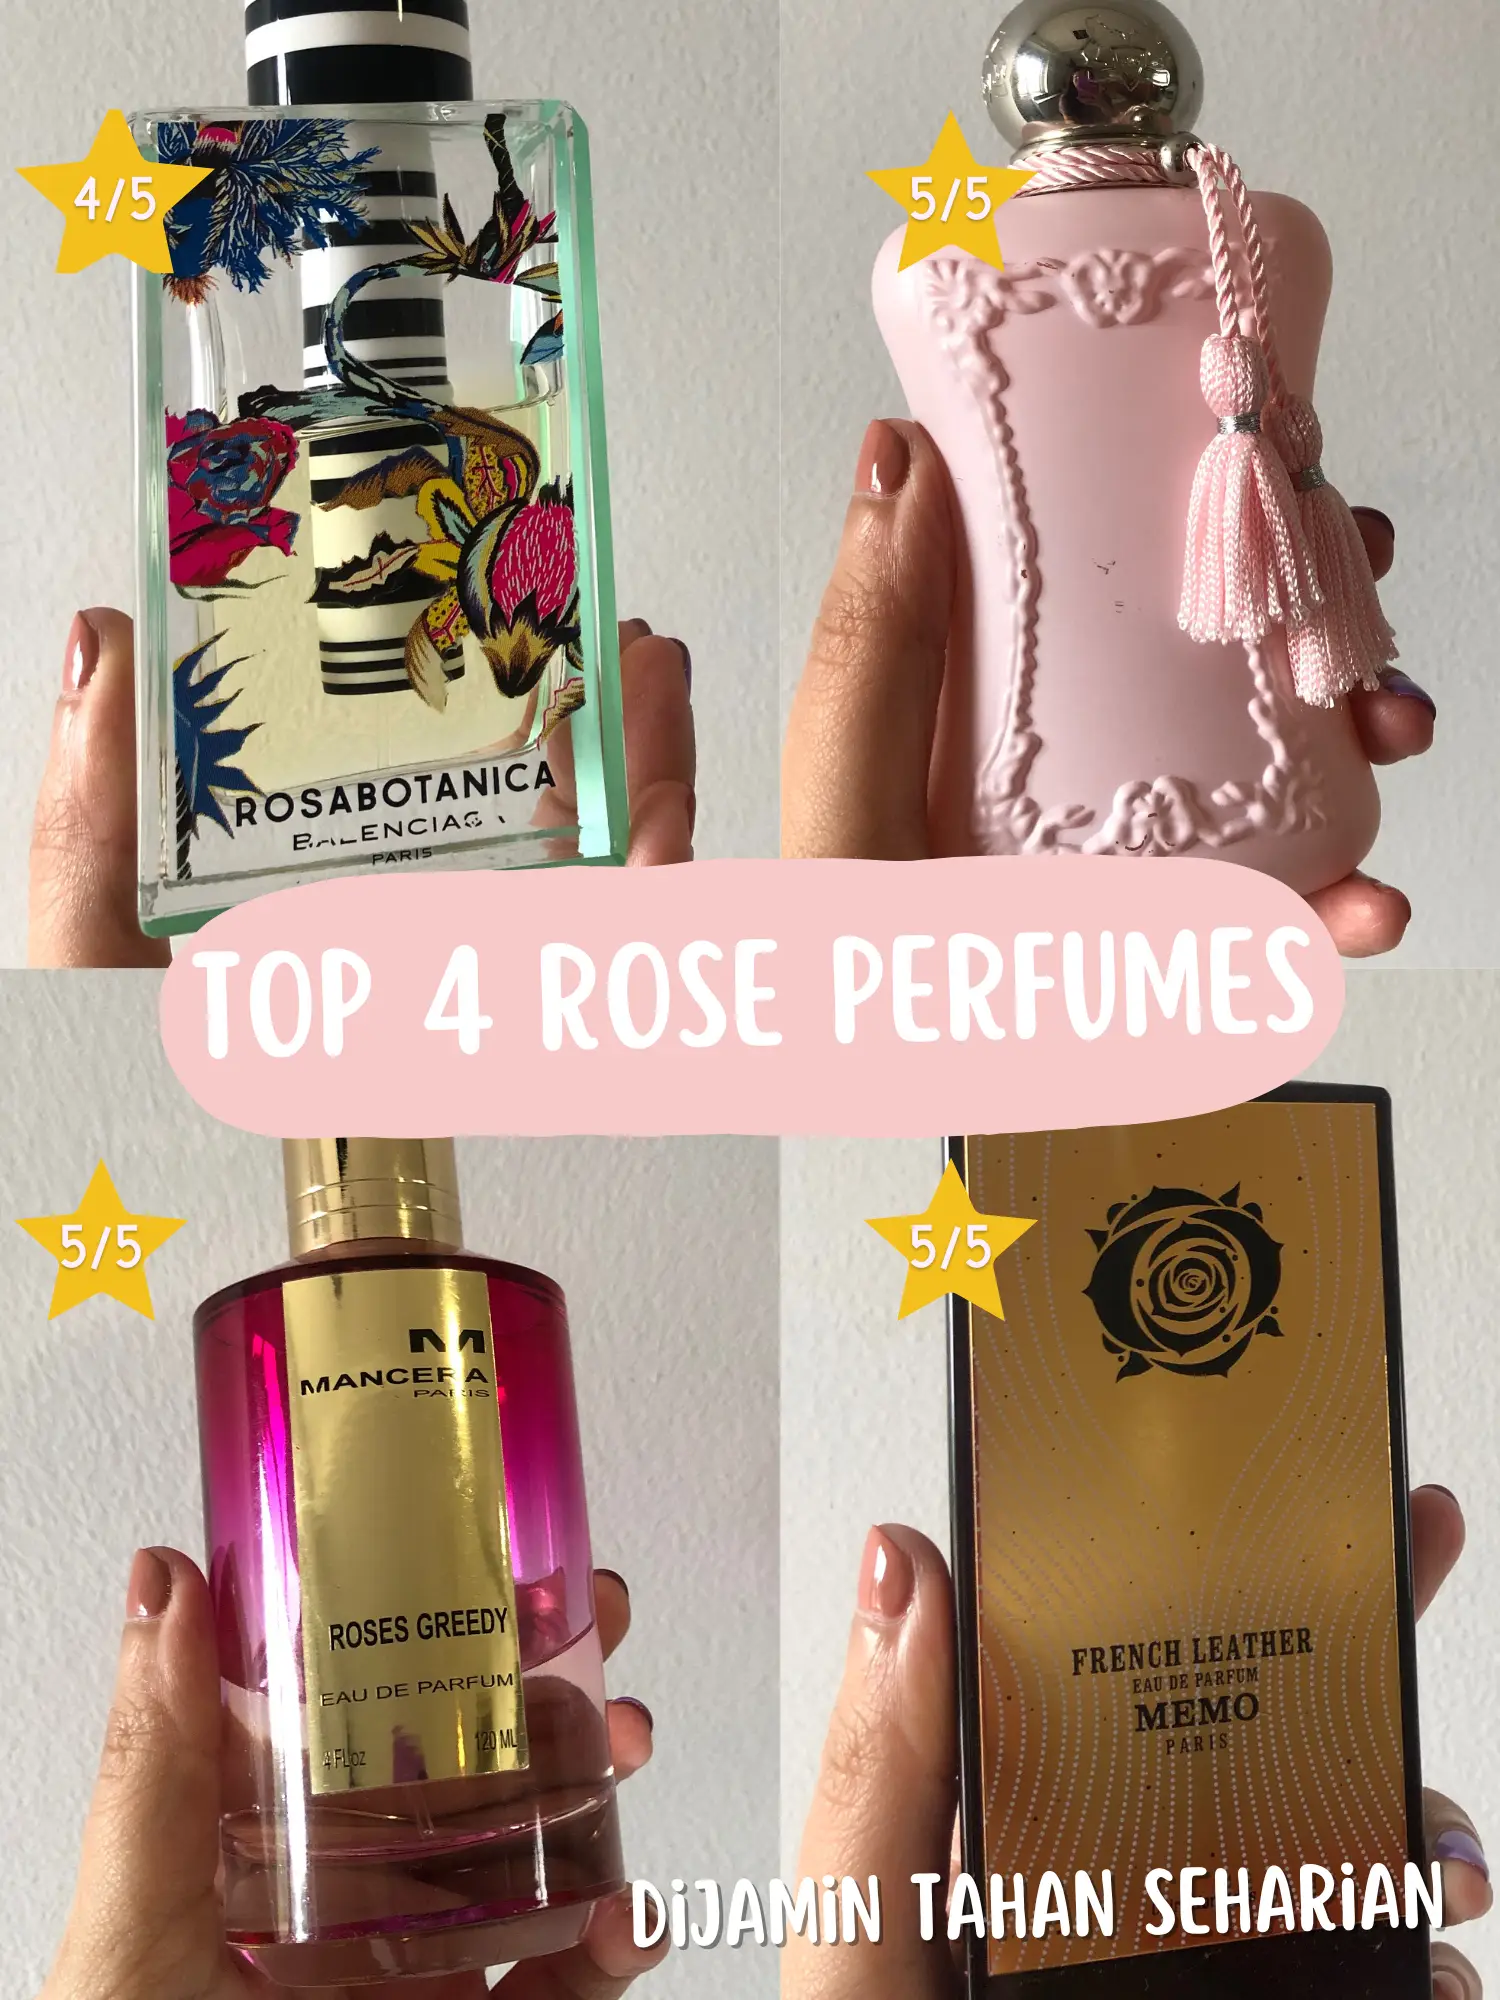 TRULY GOOD DESIGNER PERFUMES I RECOMMEND